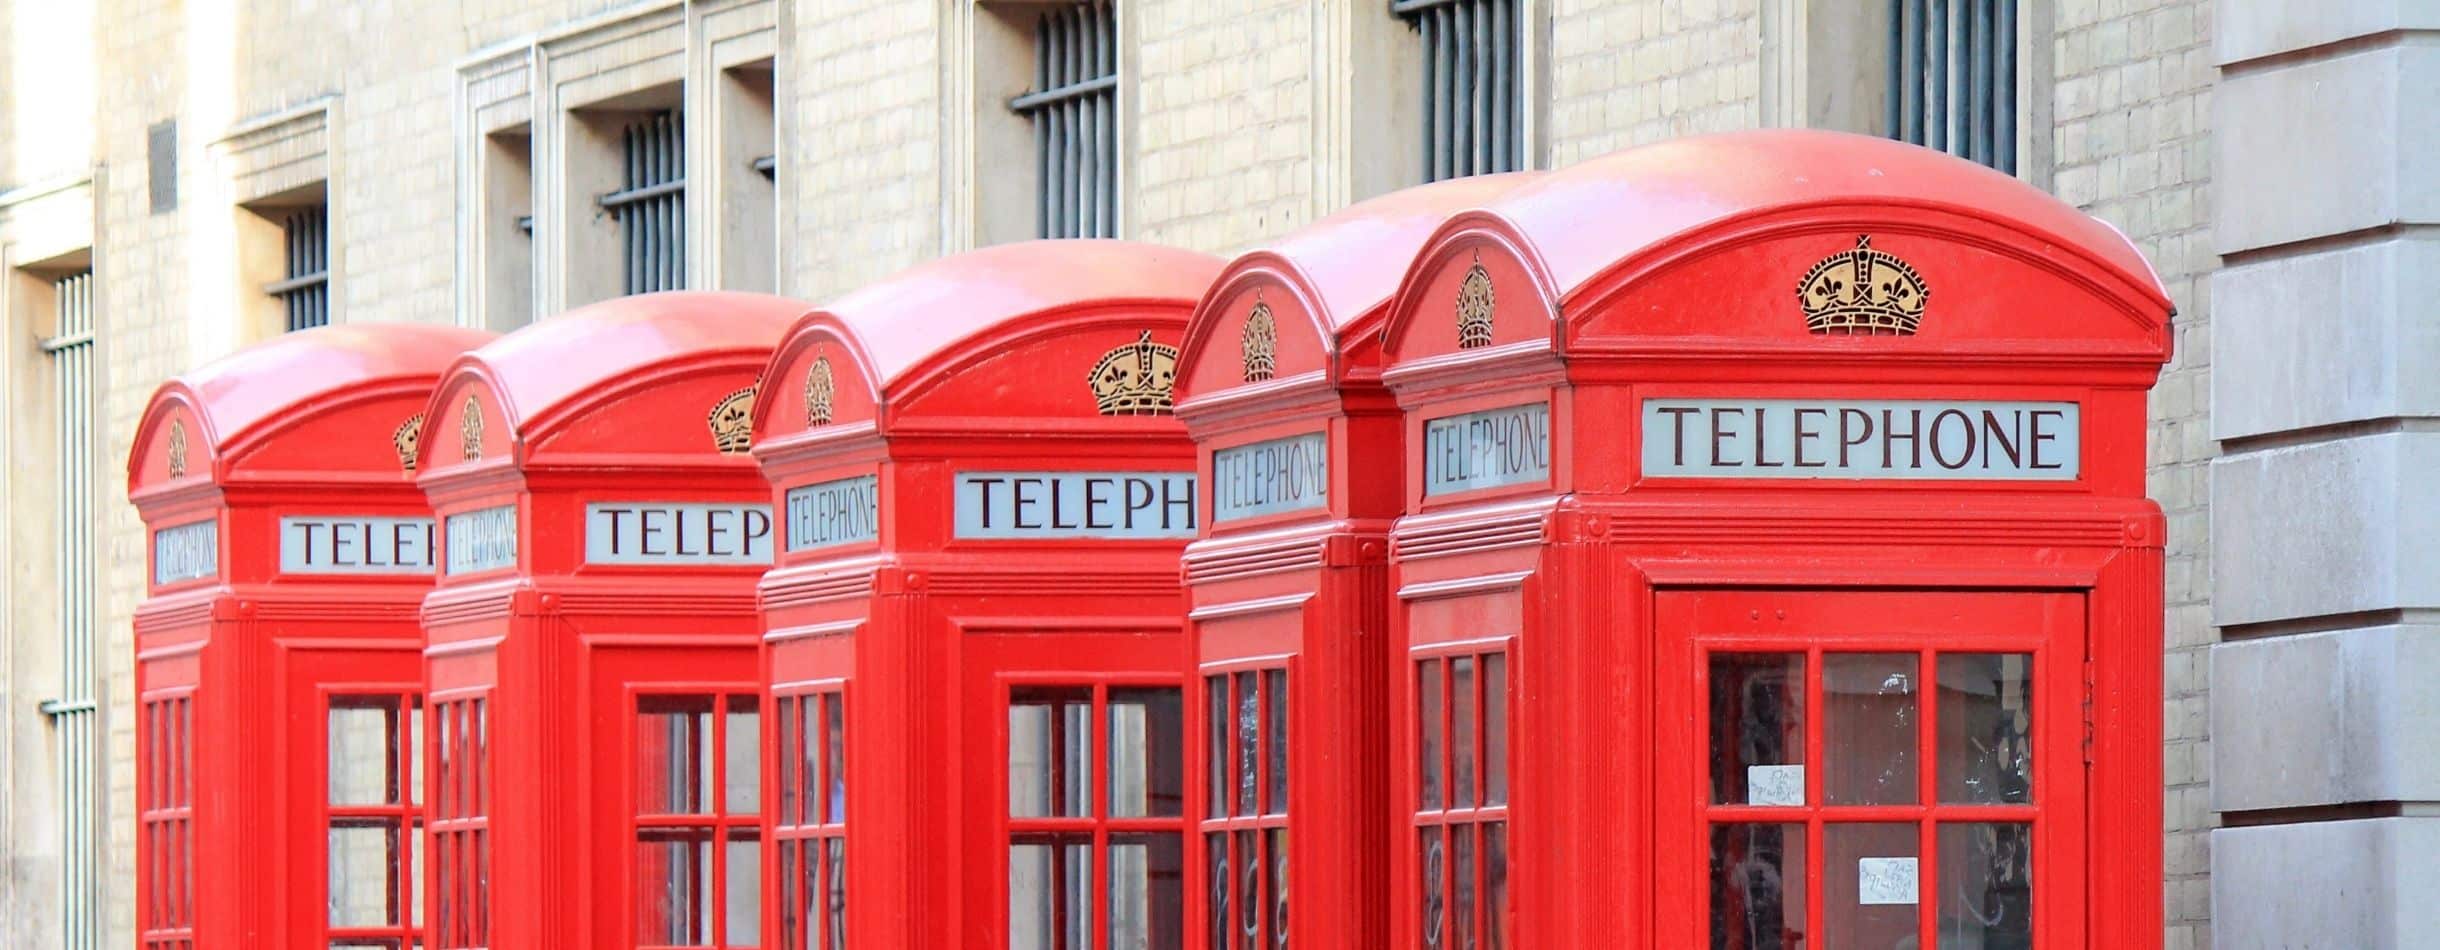 Four Red Telephone Booths on the street with Telephone written across the top of each.